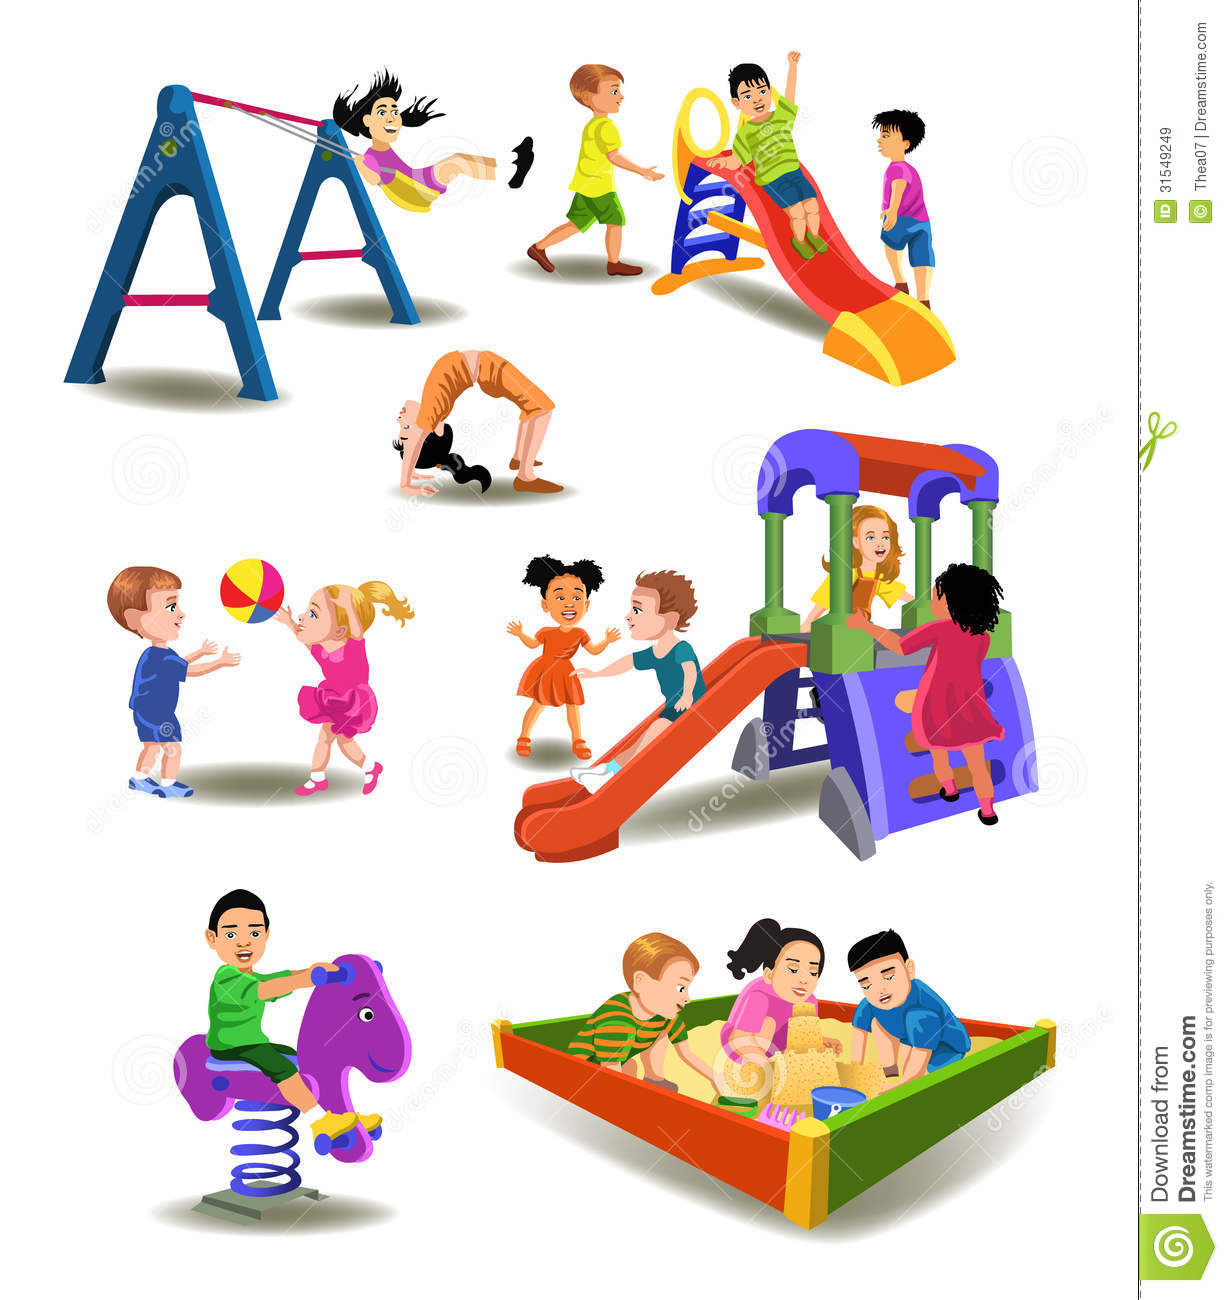 Children At The Playground Royalty Free Stock Images   Image  31549249